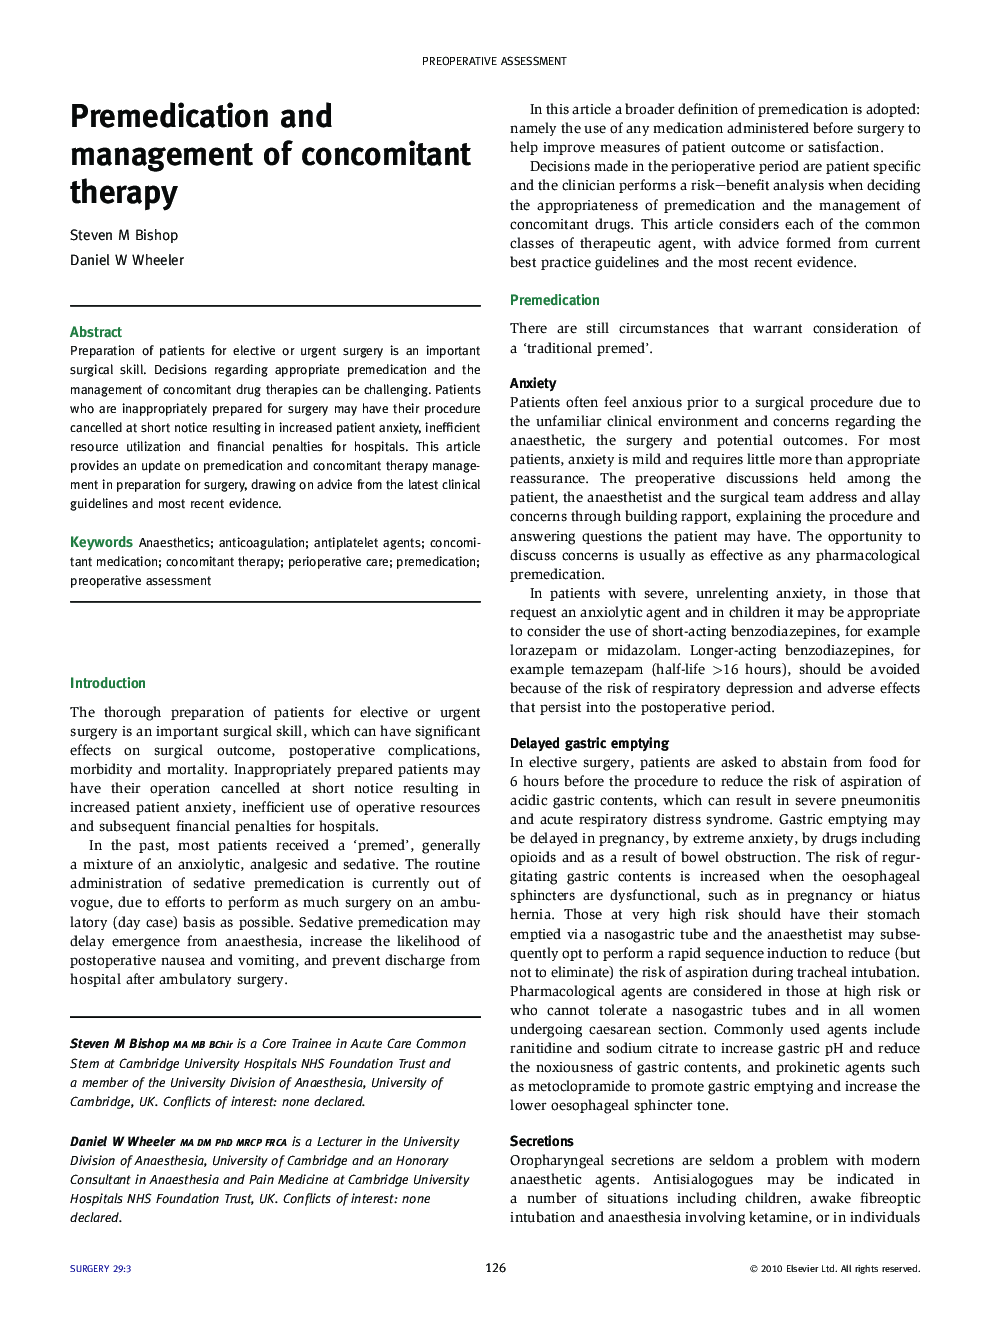 Premedication and management of concomitant therapy